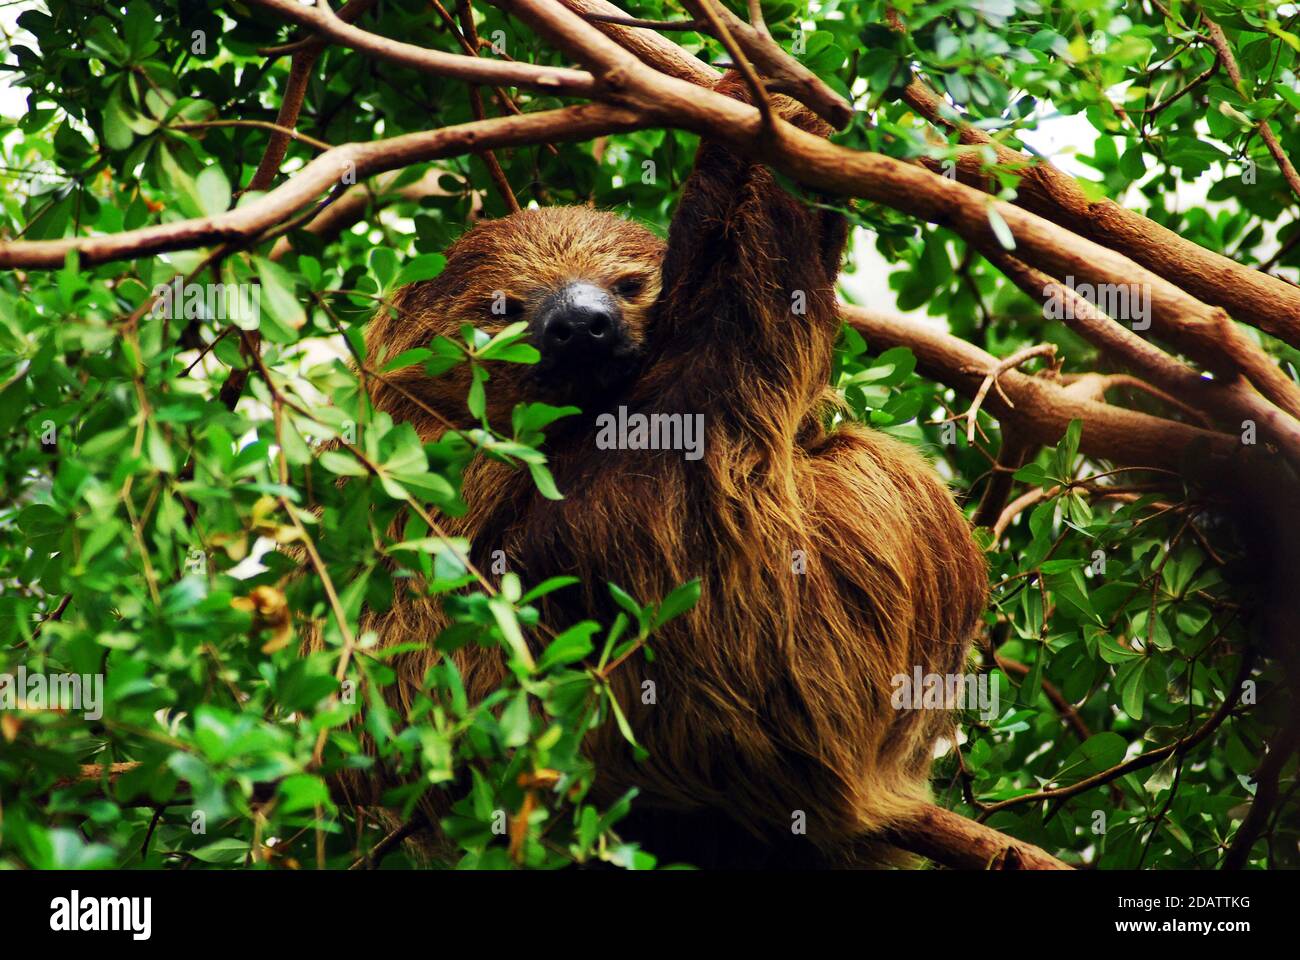 Linnaeuss two-toed sloth (Choloepus didactylus) also known as the southern two-toed sloth, unau or Linnes two-toed sloth, found in North South America Stock Photo